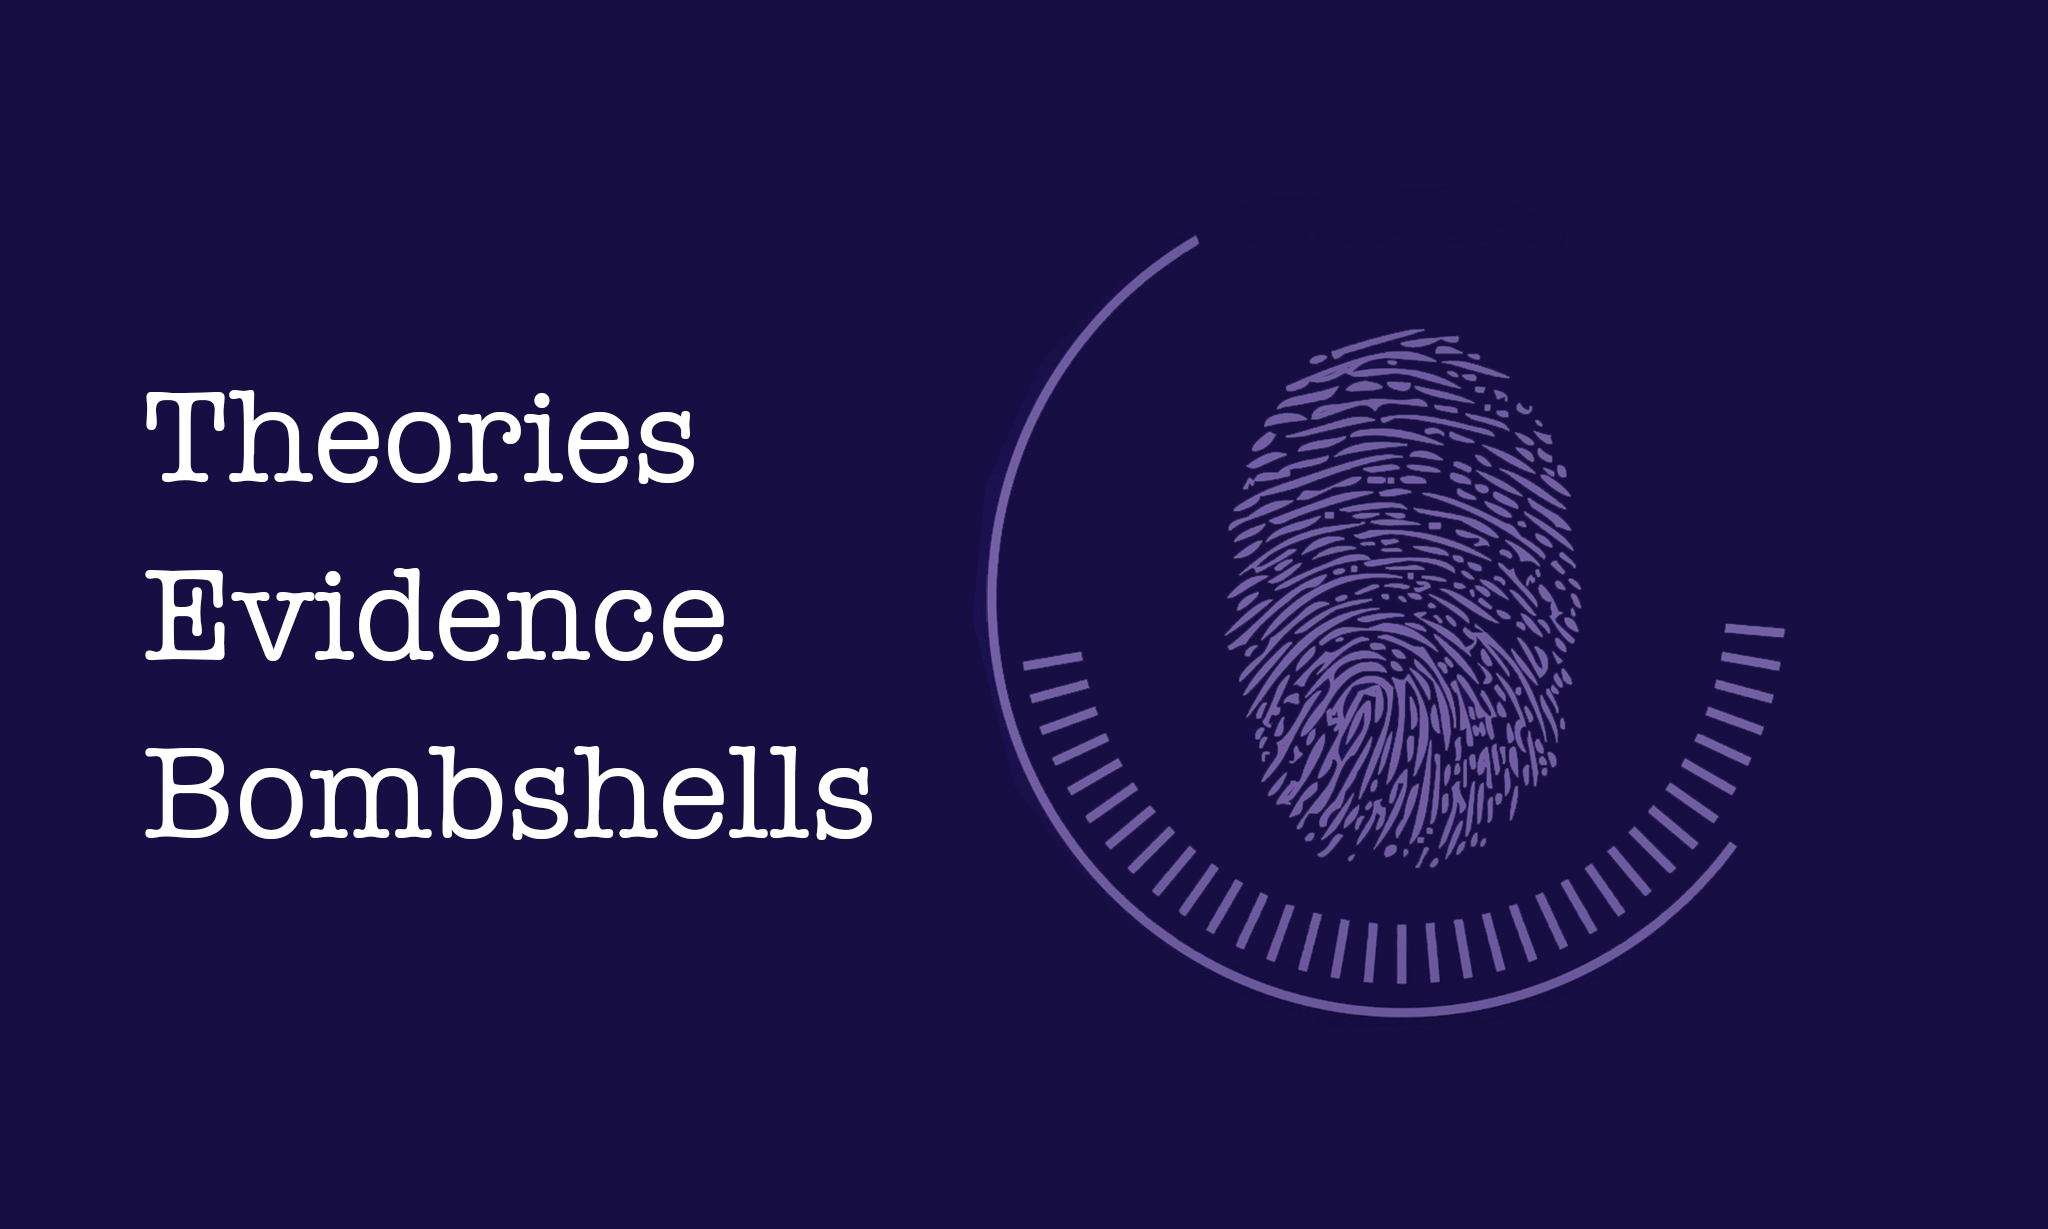  Theories, Evidence, and Bombshells